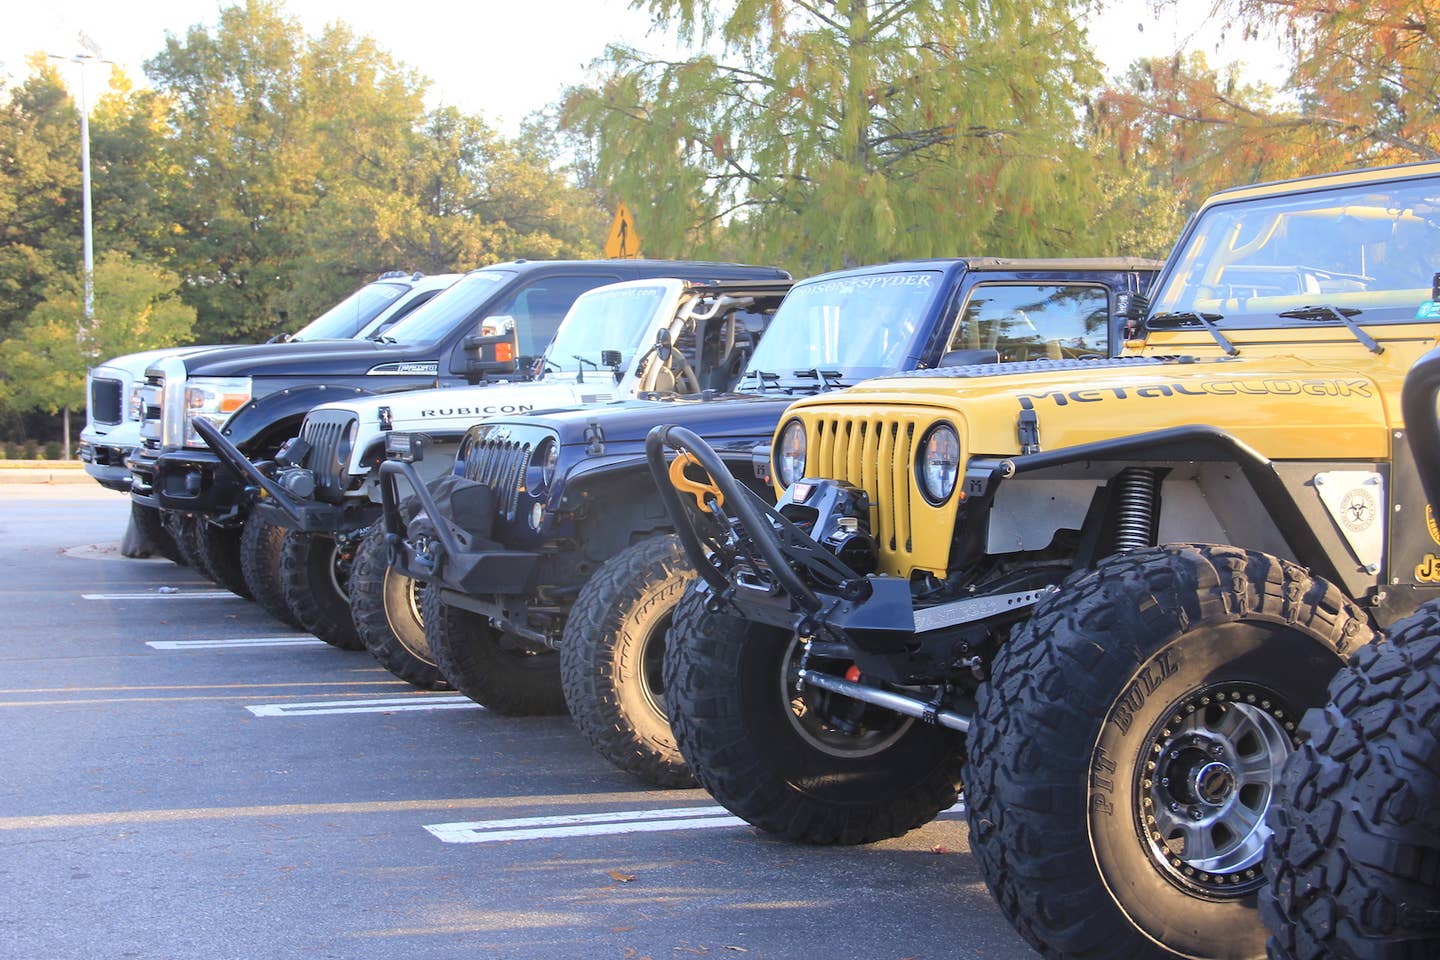 The Trucks, Jeeps And Radical Rigs Of America’s Largest Monthly Automotive Meet